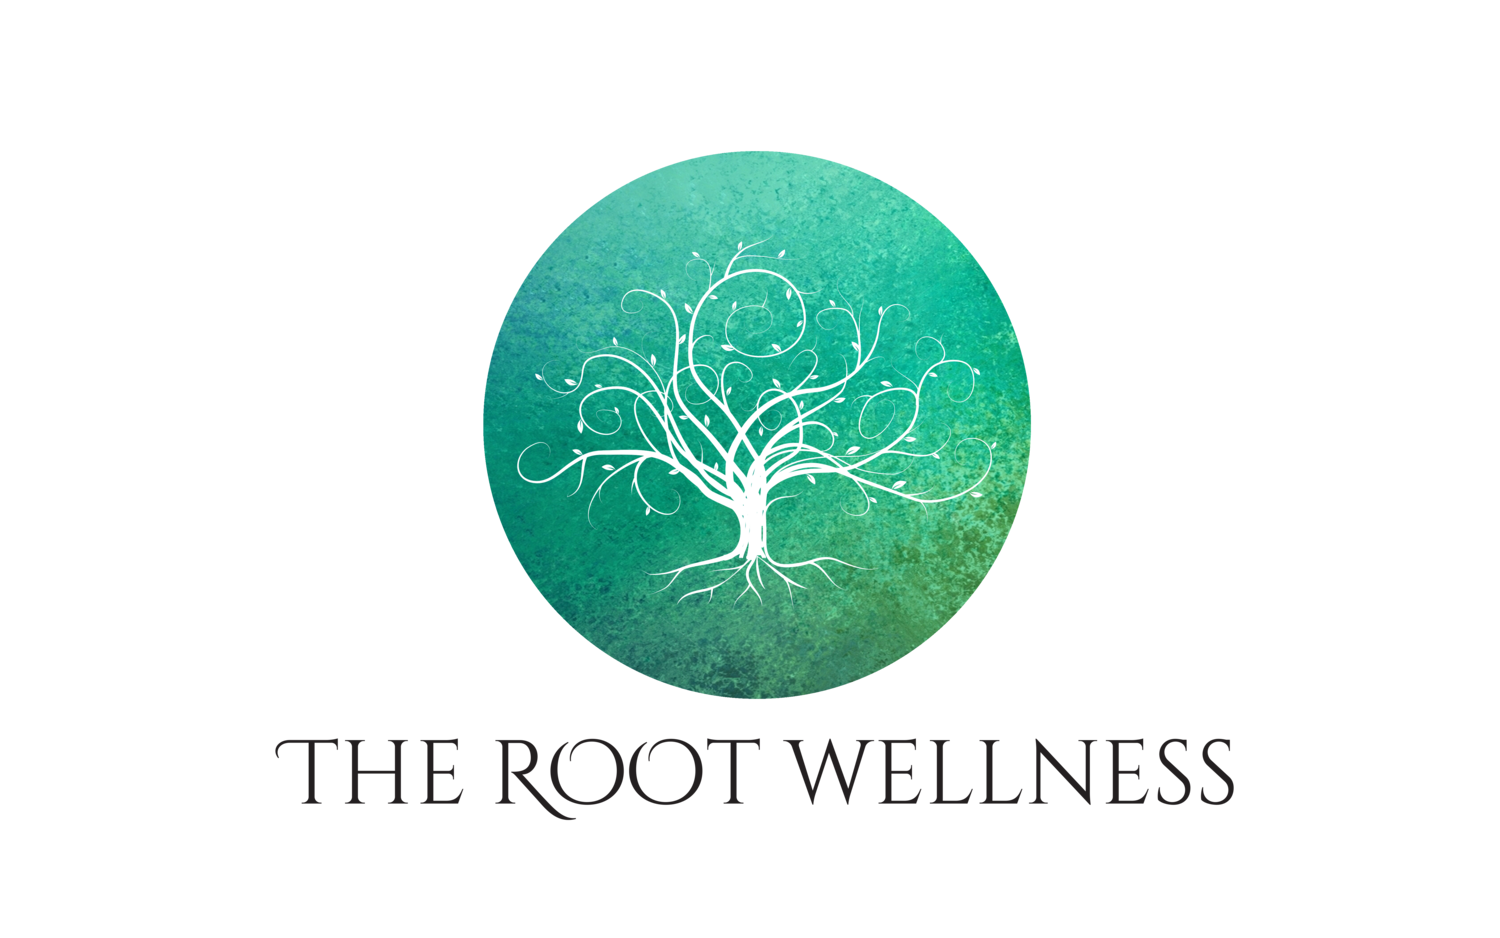 The Root Wellness